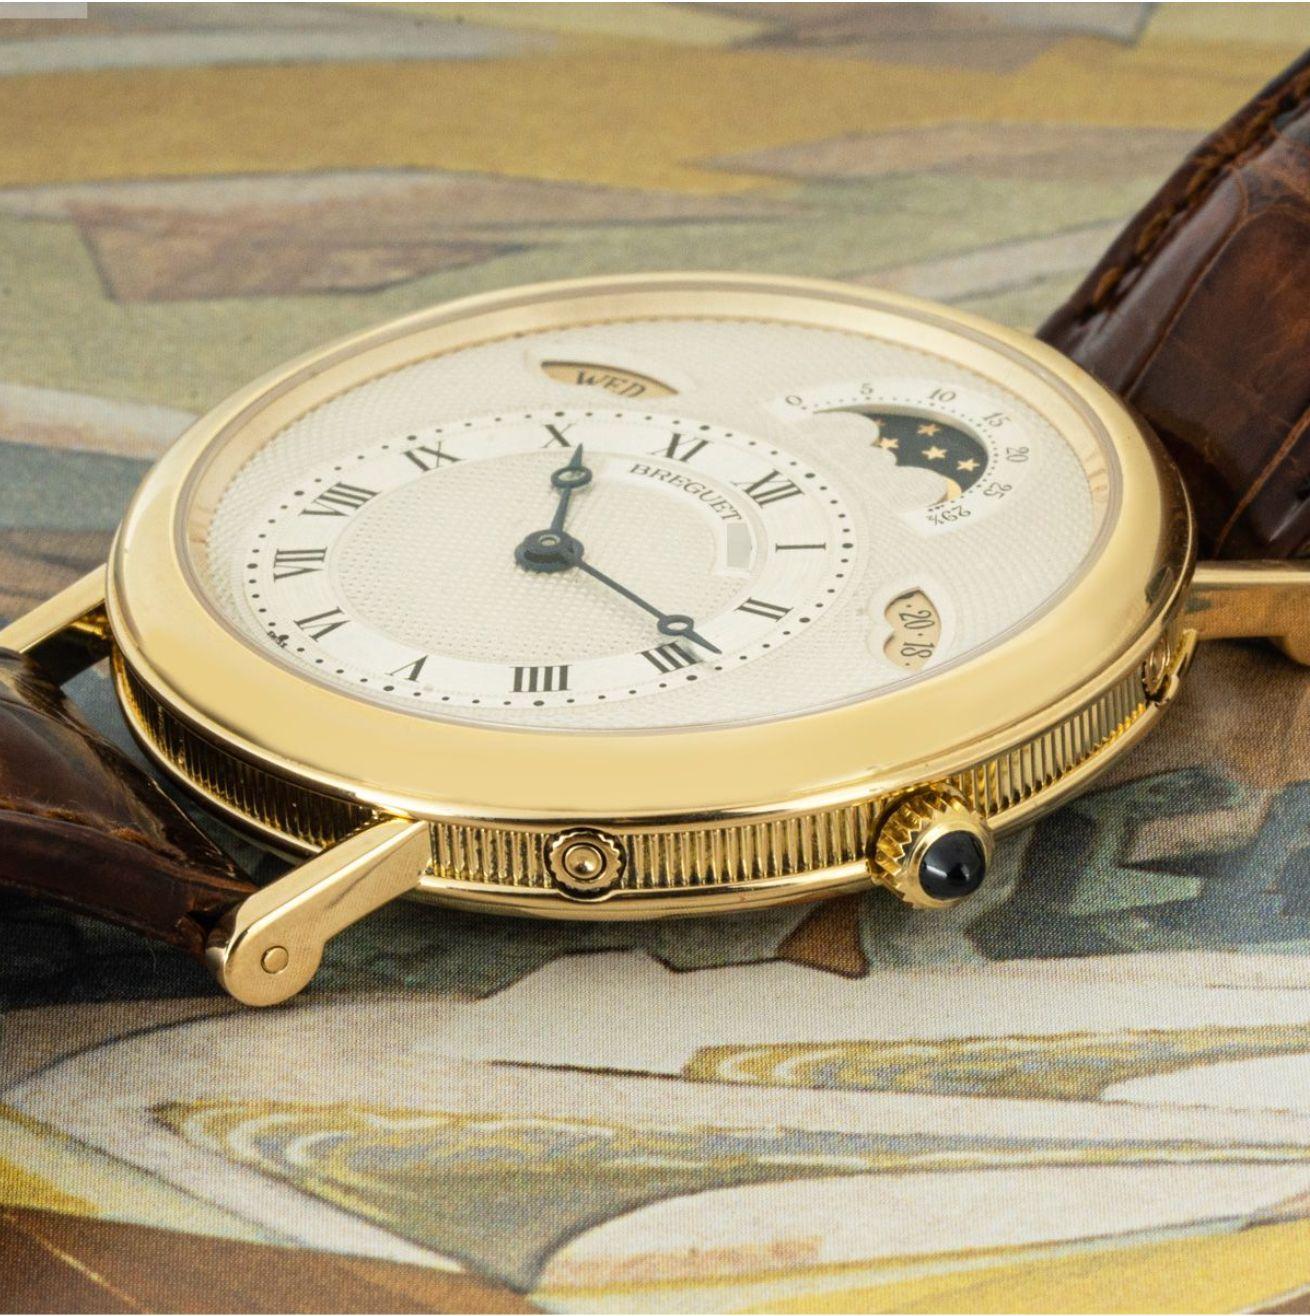 A men's 36mm Classique Calendar by Breguet crafted in yellow gold. Featuring a silver guilloche dial with roman numerals, a day and date aperture as well as a moon phase complication. The watch is also fitted with a sapphire glass, a self-winding